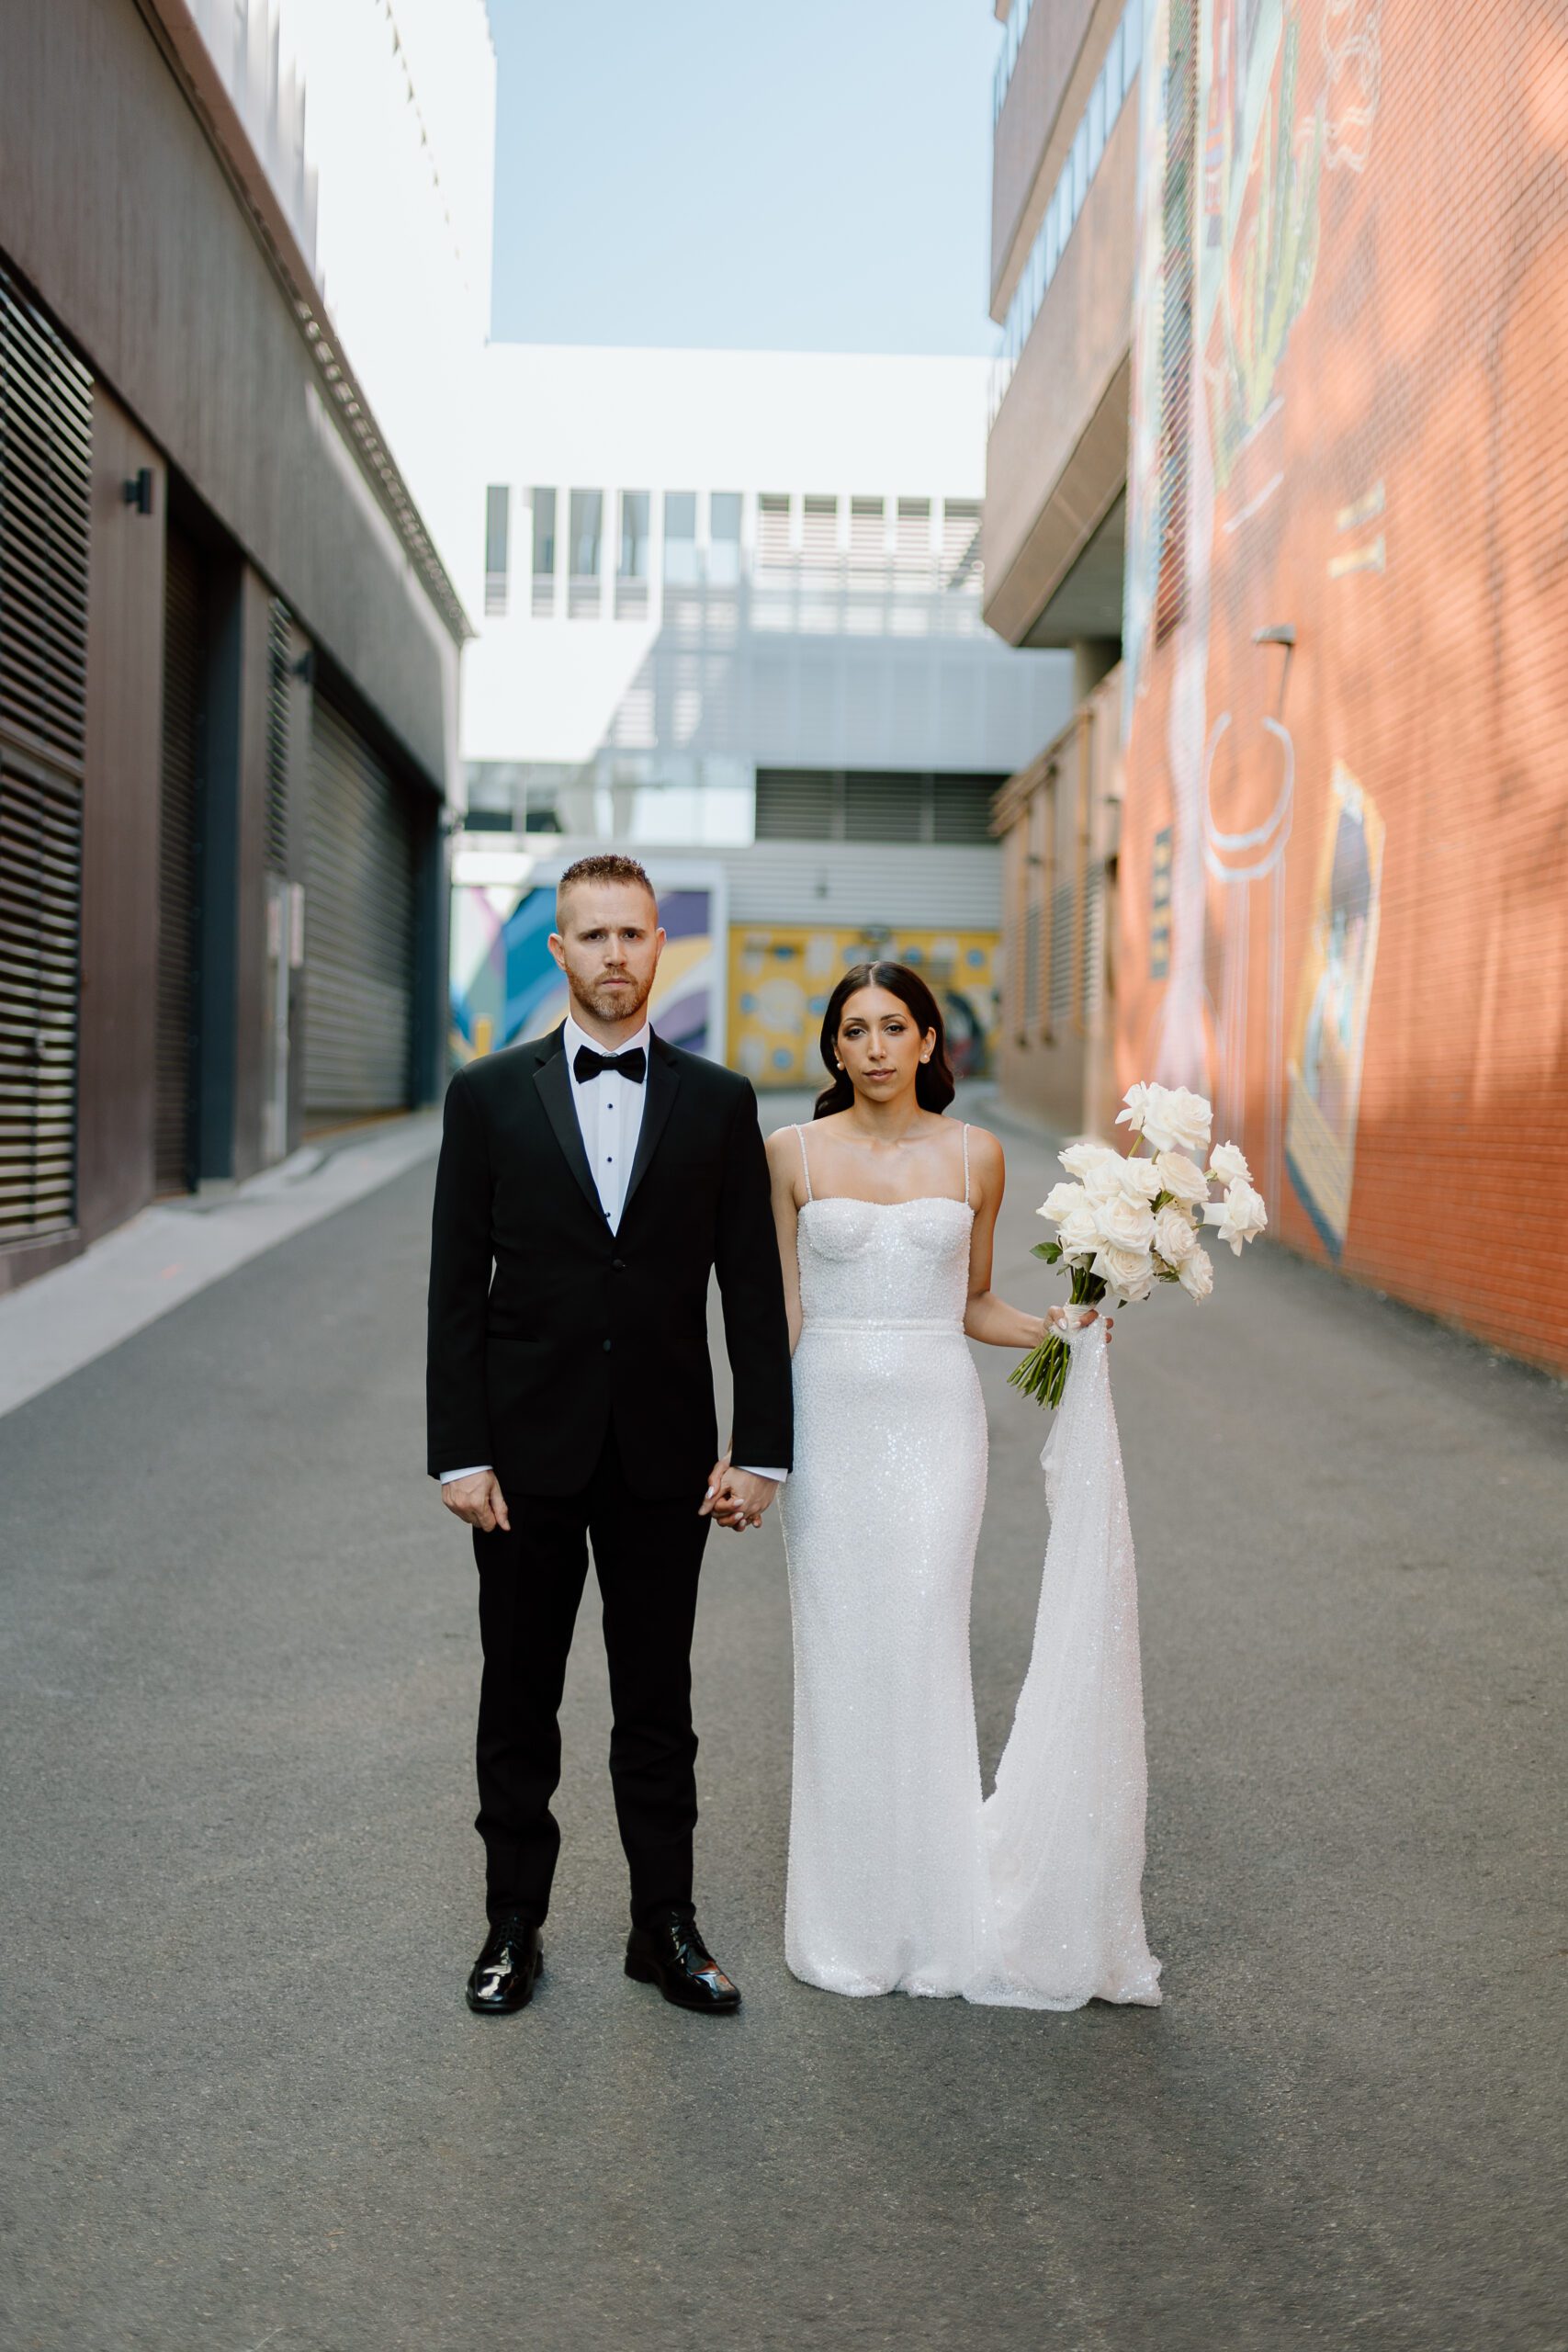 A bride and groom stand holding hands in a Vancouver alleyway, the bride in a white sequined gown with a bouquet, and the groom in a classic black tuxedo.